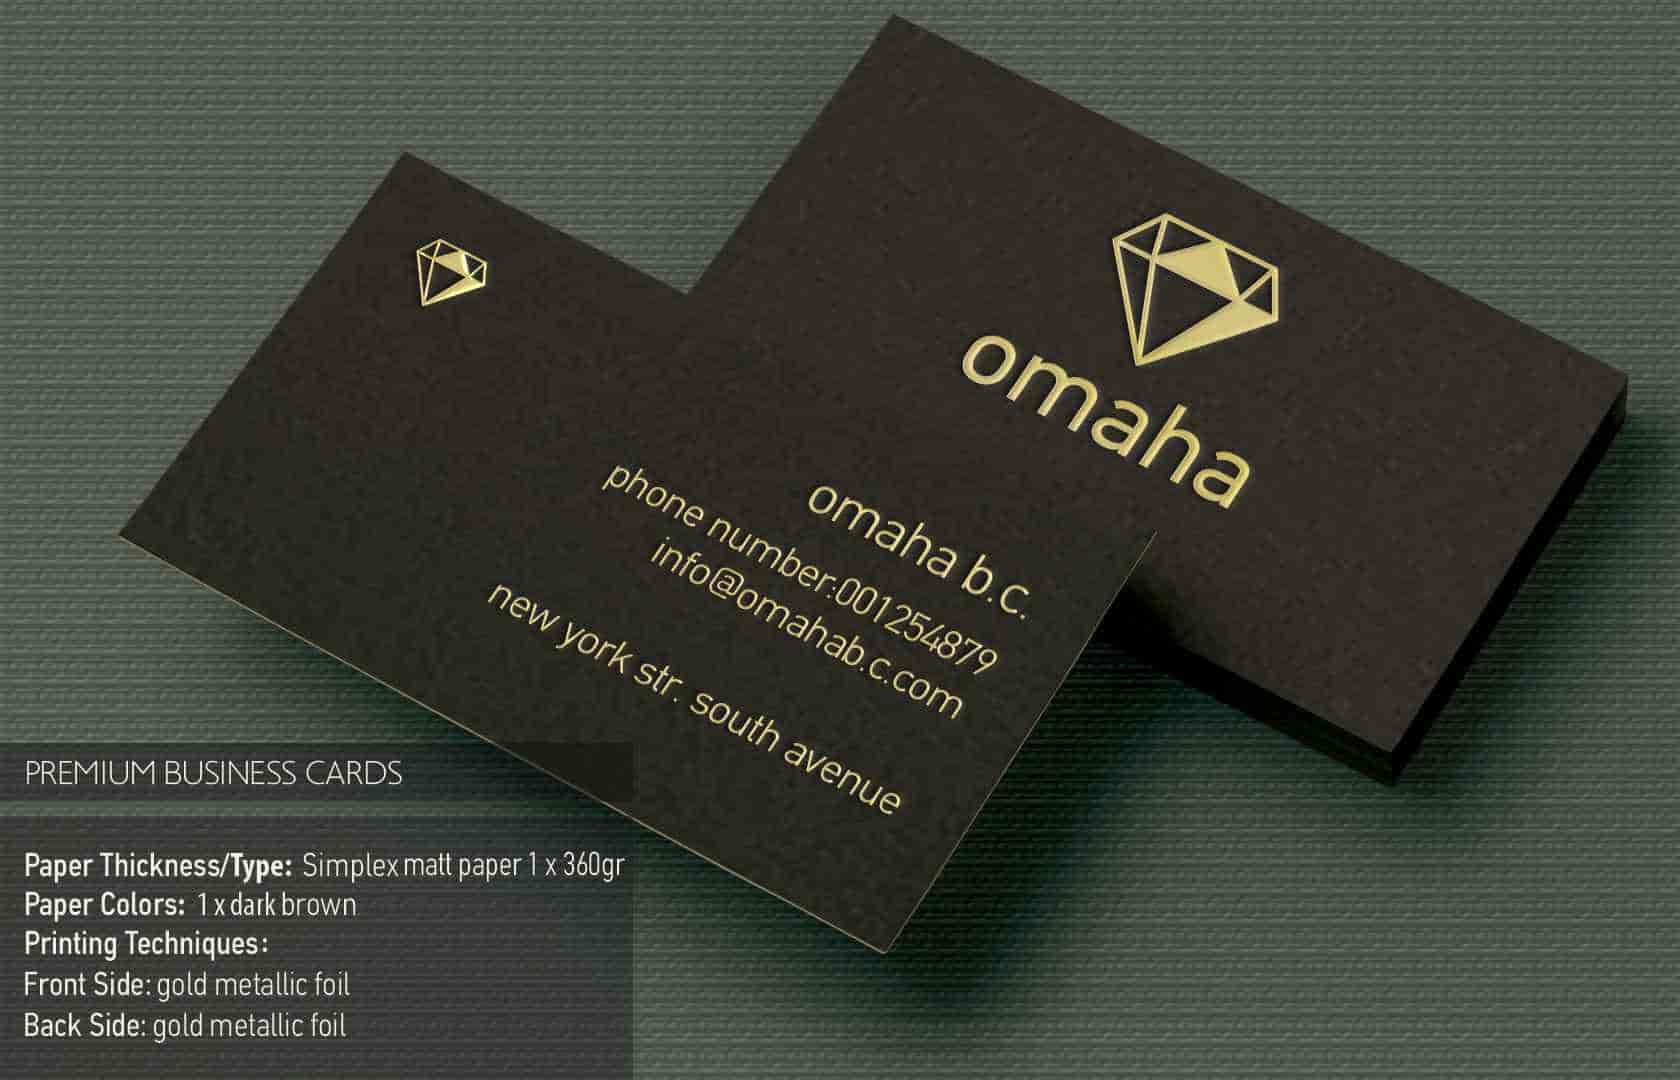 Business card with great design.